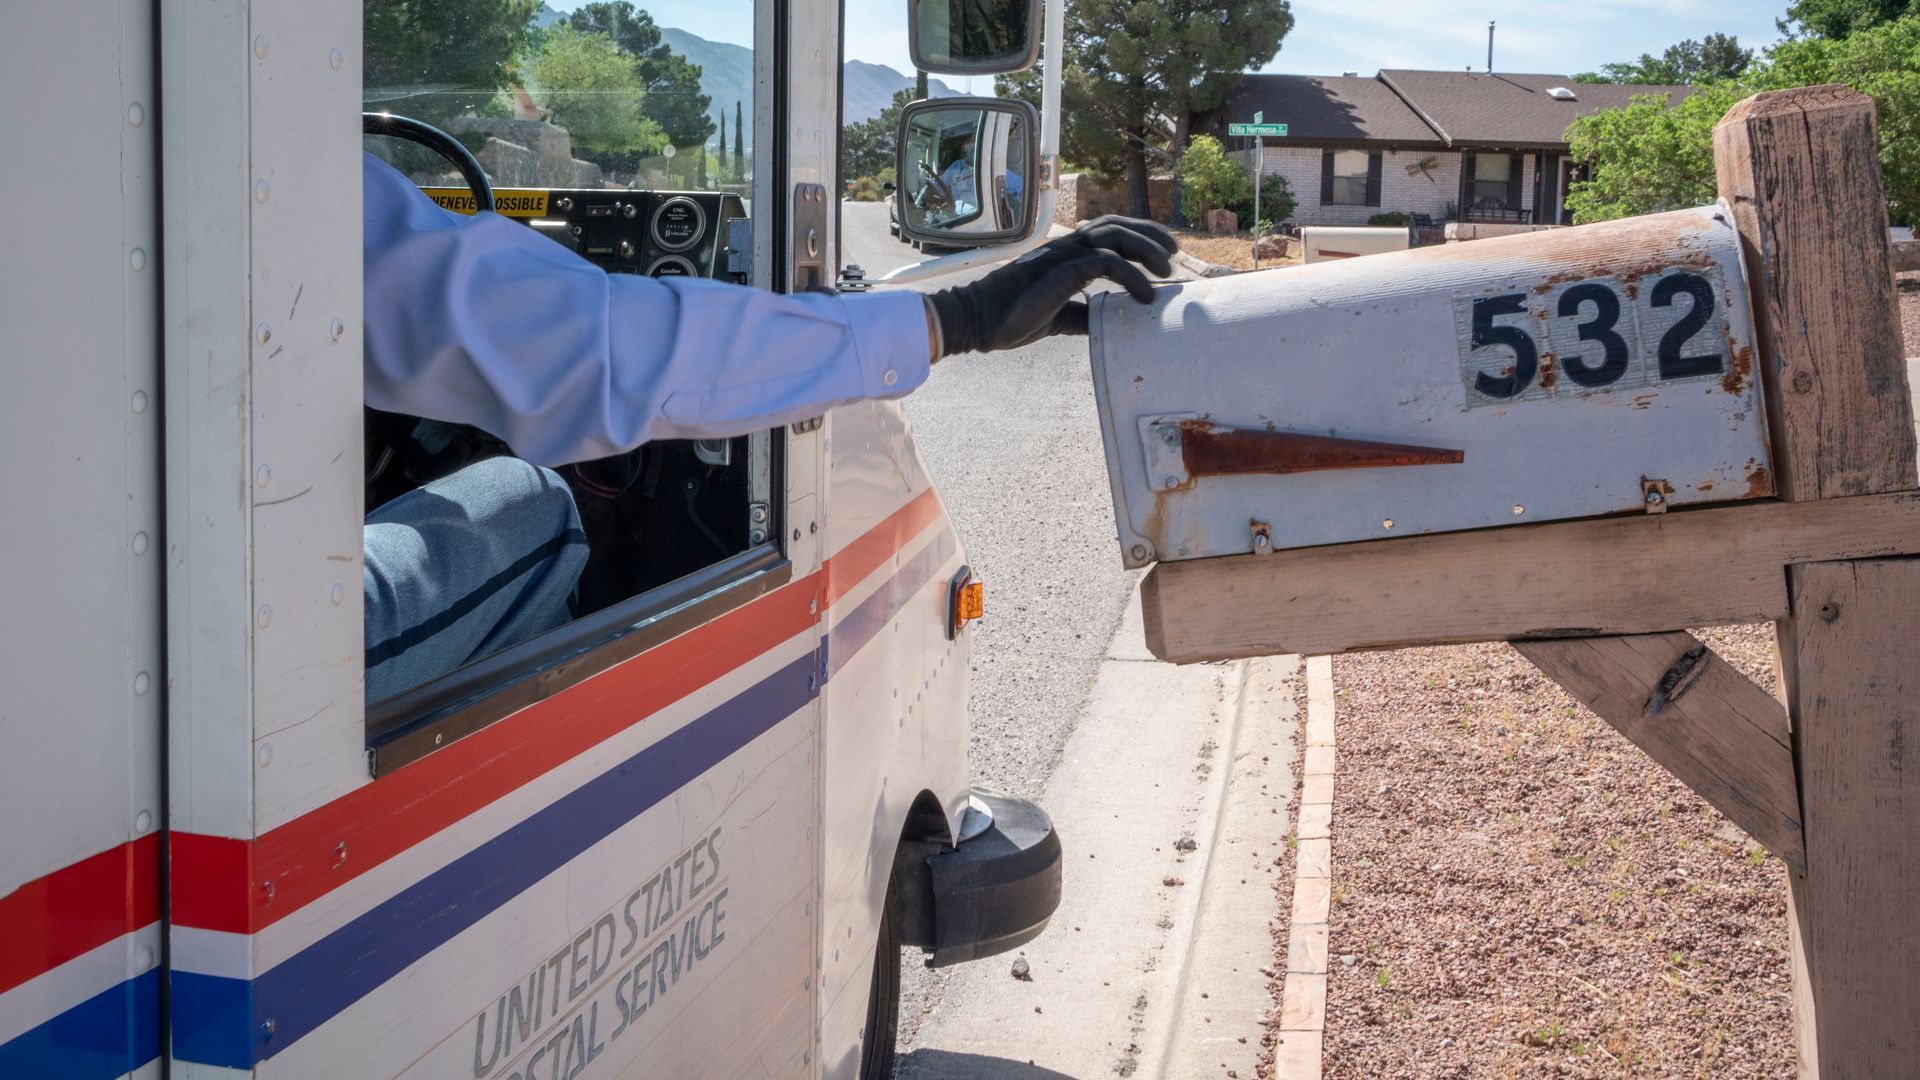 Mail truck with postal worker opening a mailbox